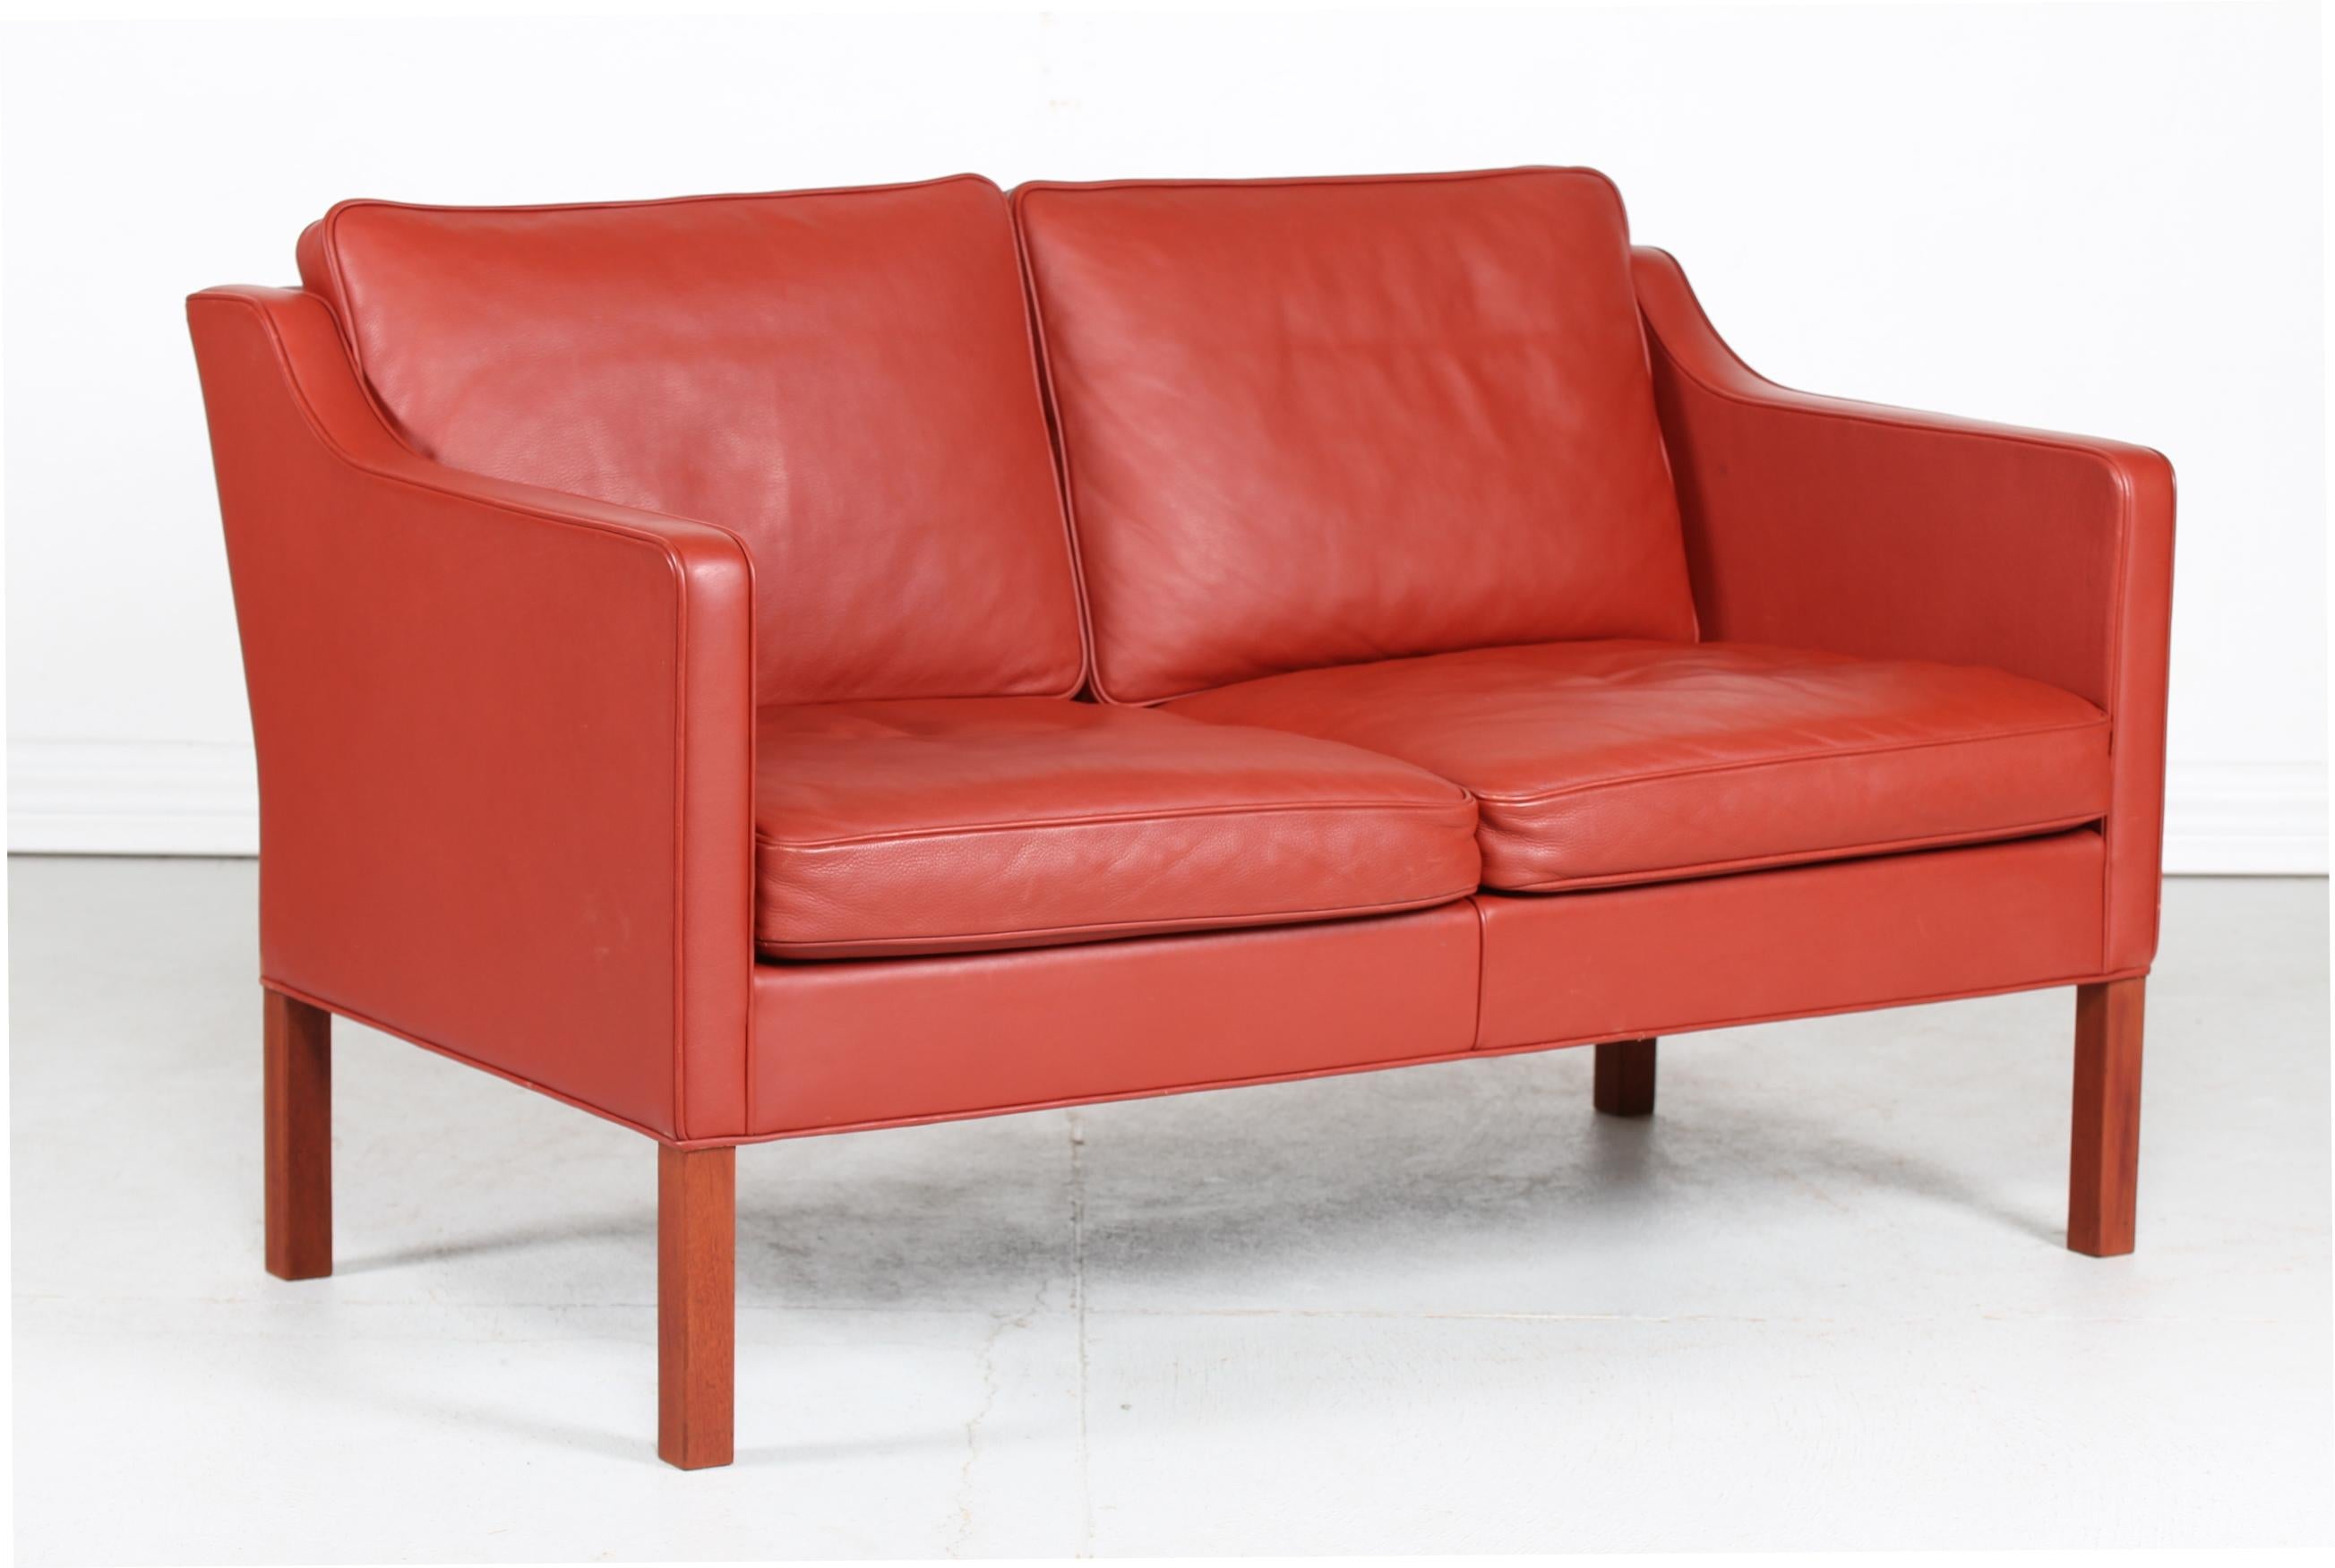 Børge Mogensen Sofa 2322 with Red Brown Leather by Fredericia Furniture, 1995 For Sale 1